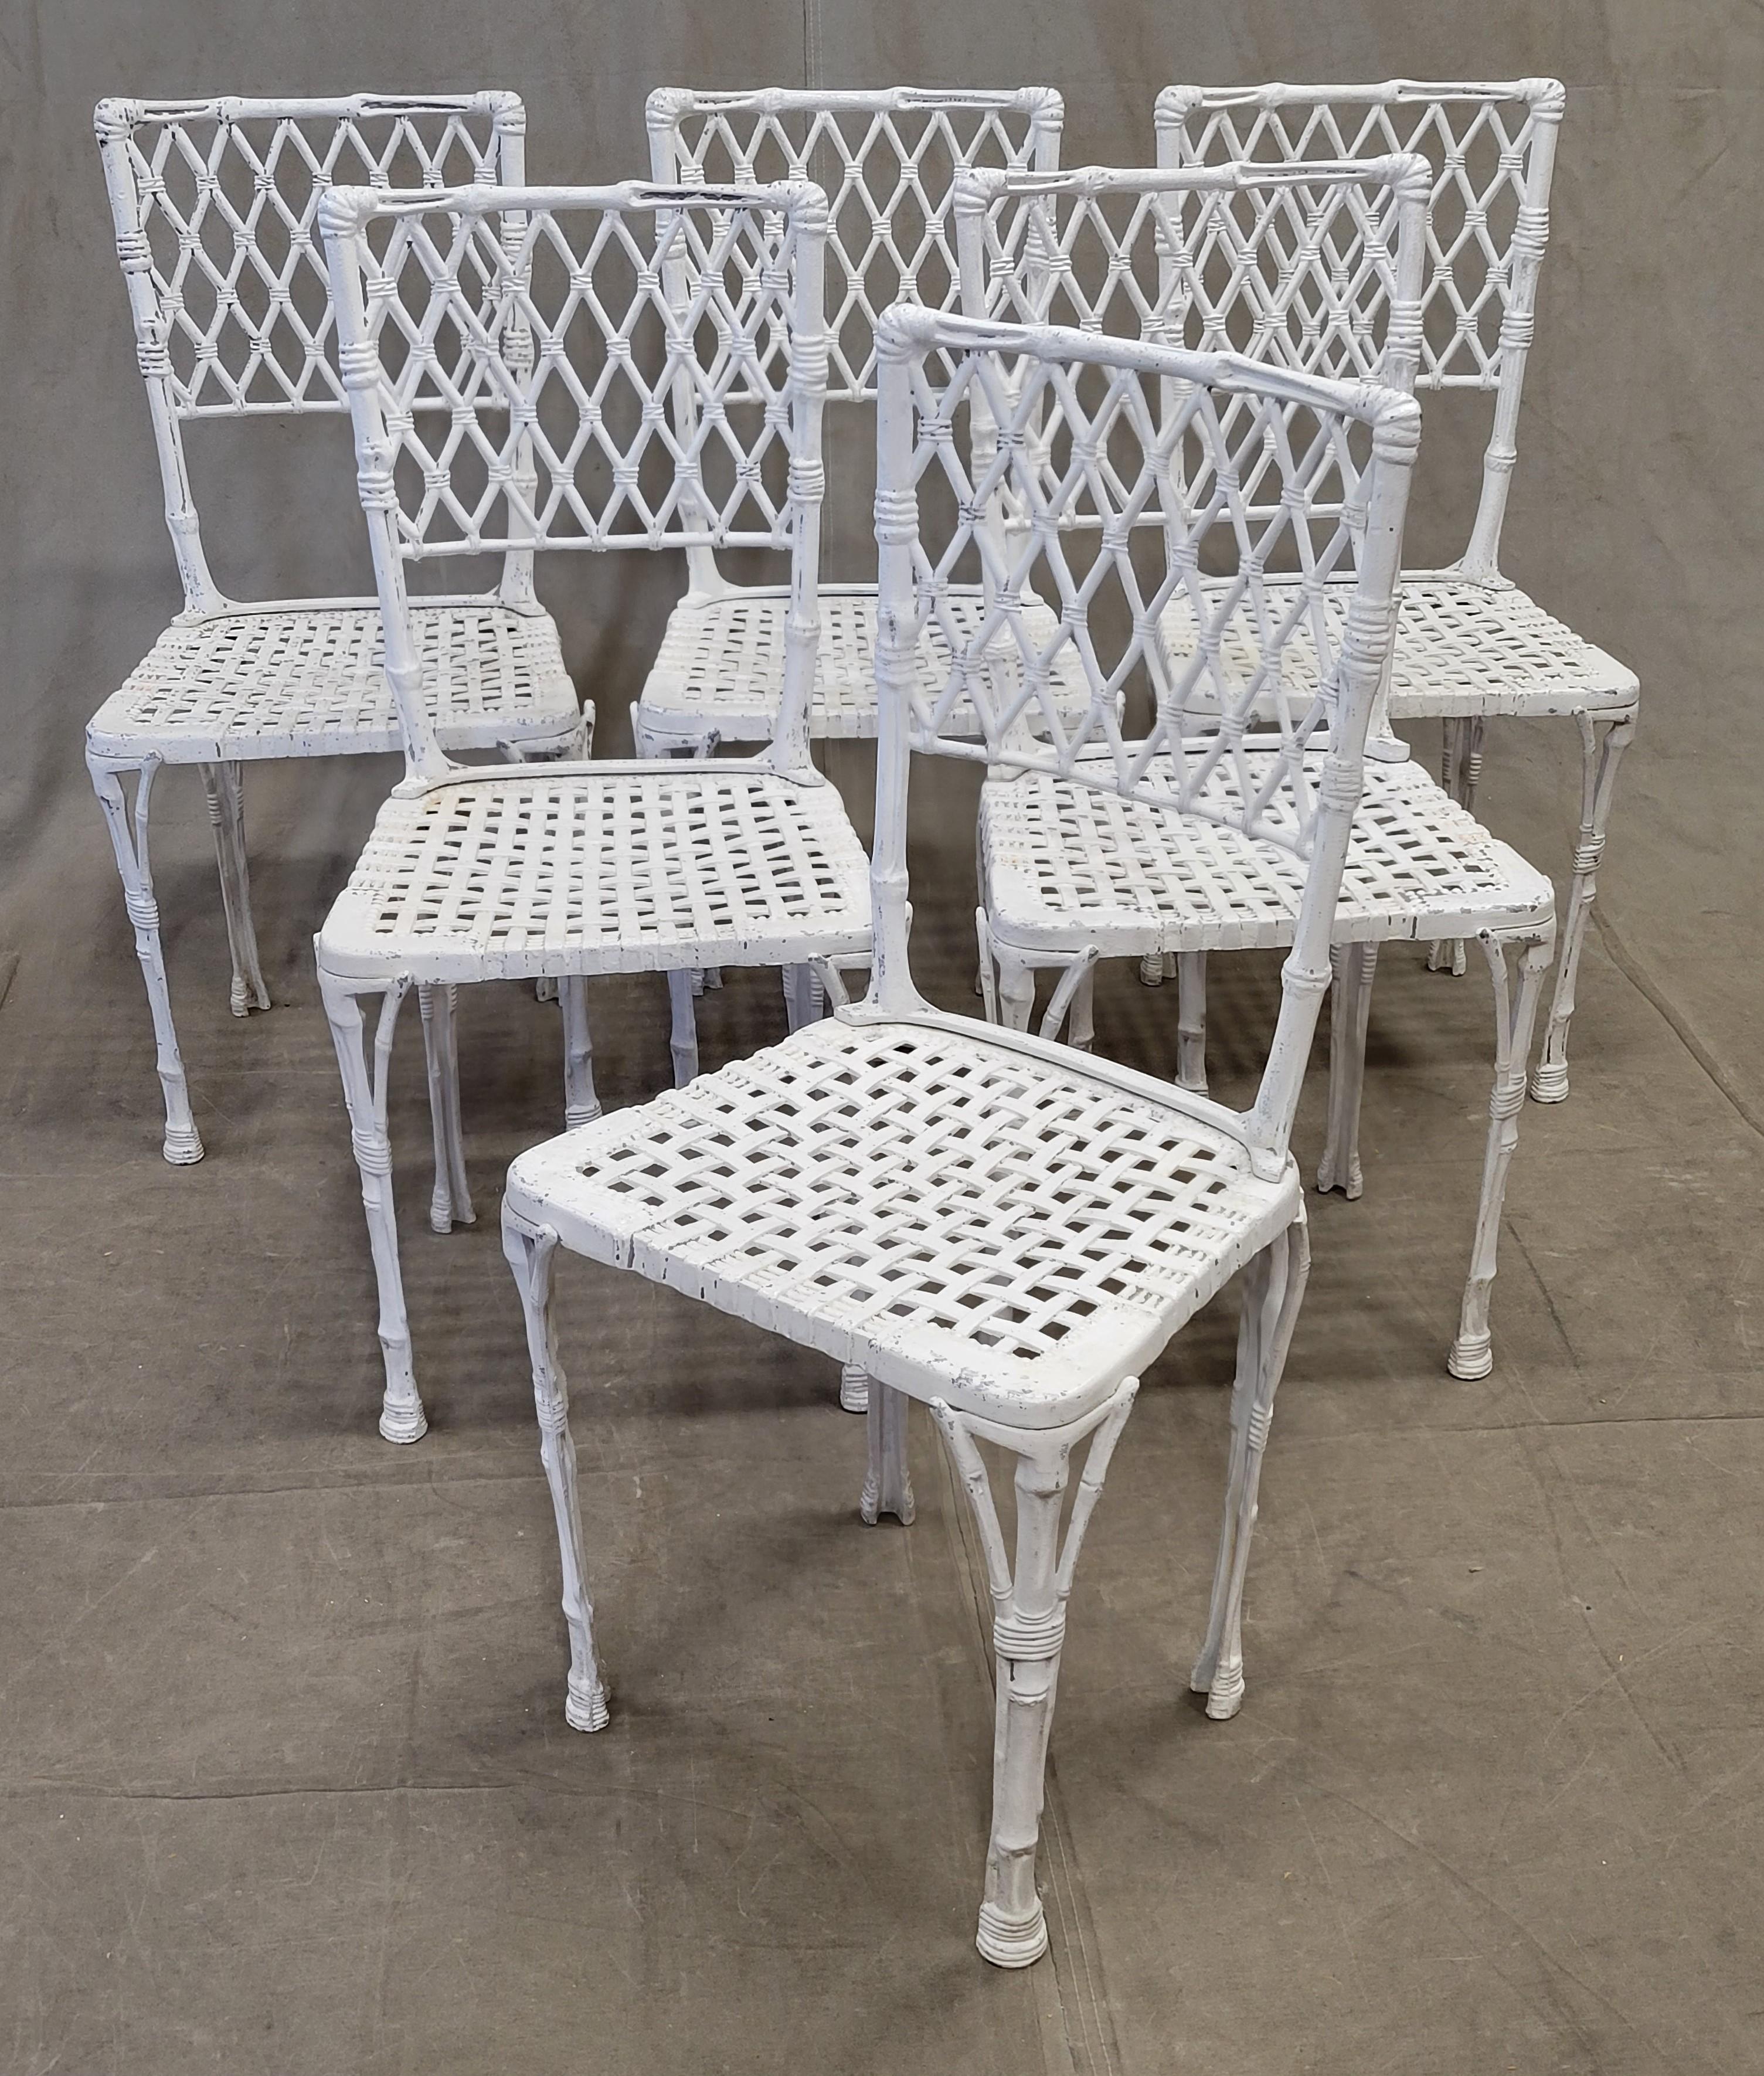 An absolutely charming set of six solid cast vintage French aluminum chinoiserie faux bamboo garden chairs. Old white paint that is worn adds to the charm of this set. They are strong and ready for many years of use on your patio or in your